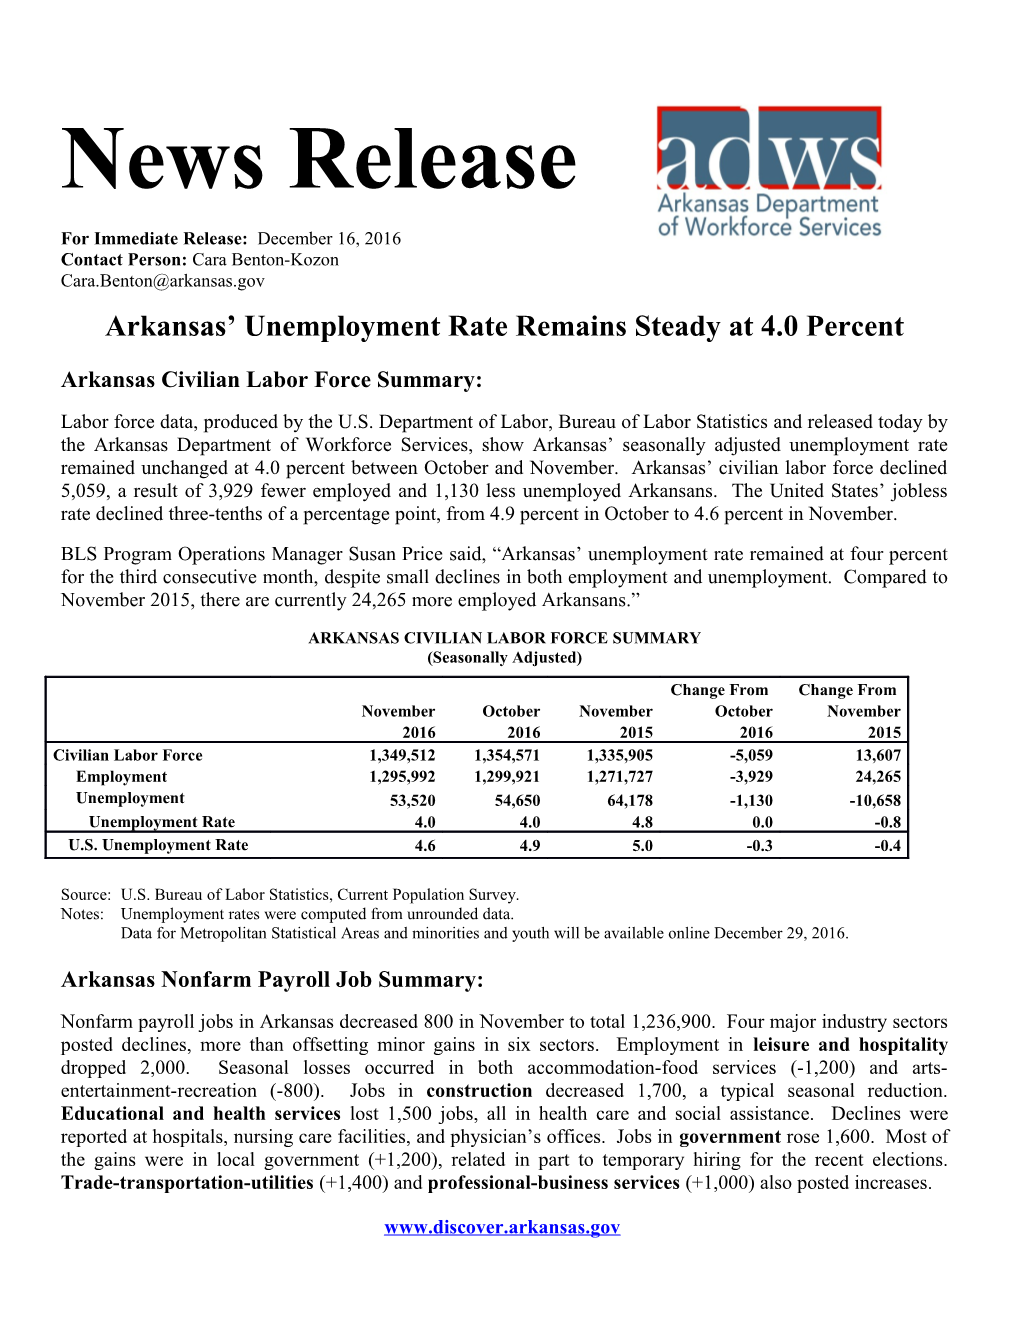 Arkansas Unemployment Rate Remains Steady at 4.0 Percent